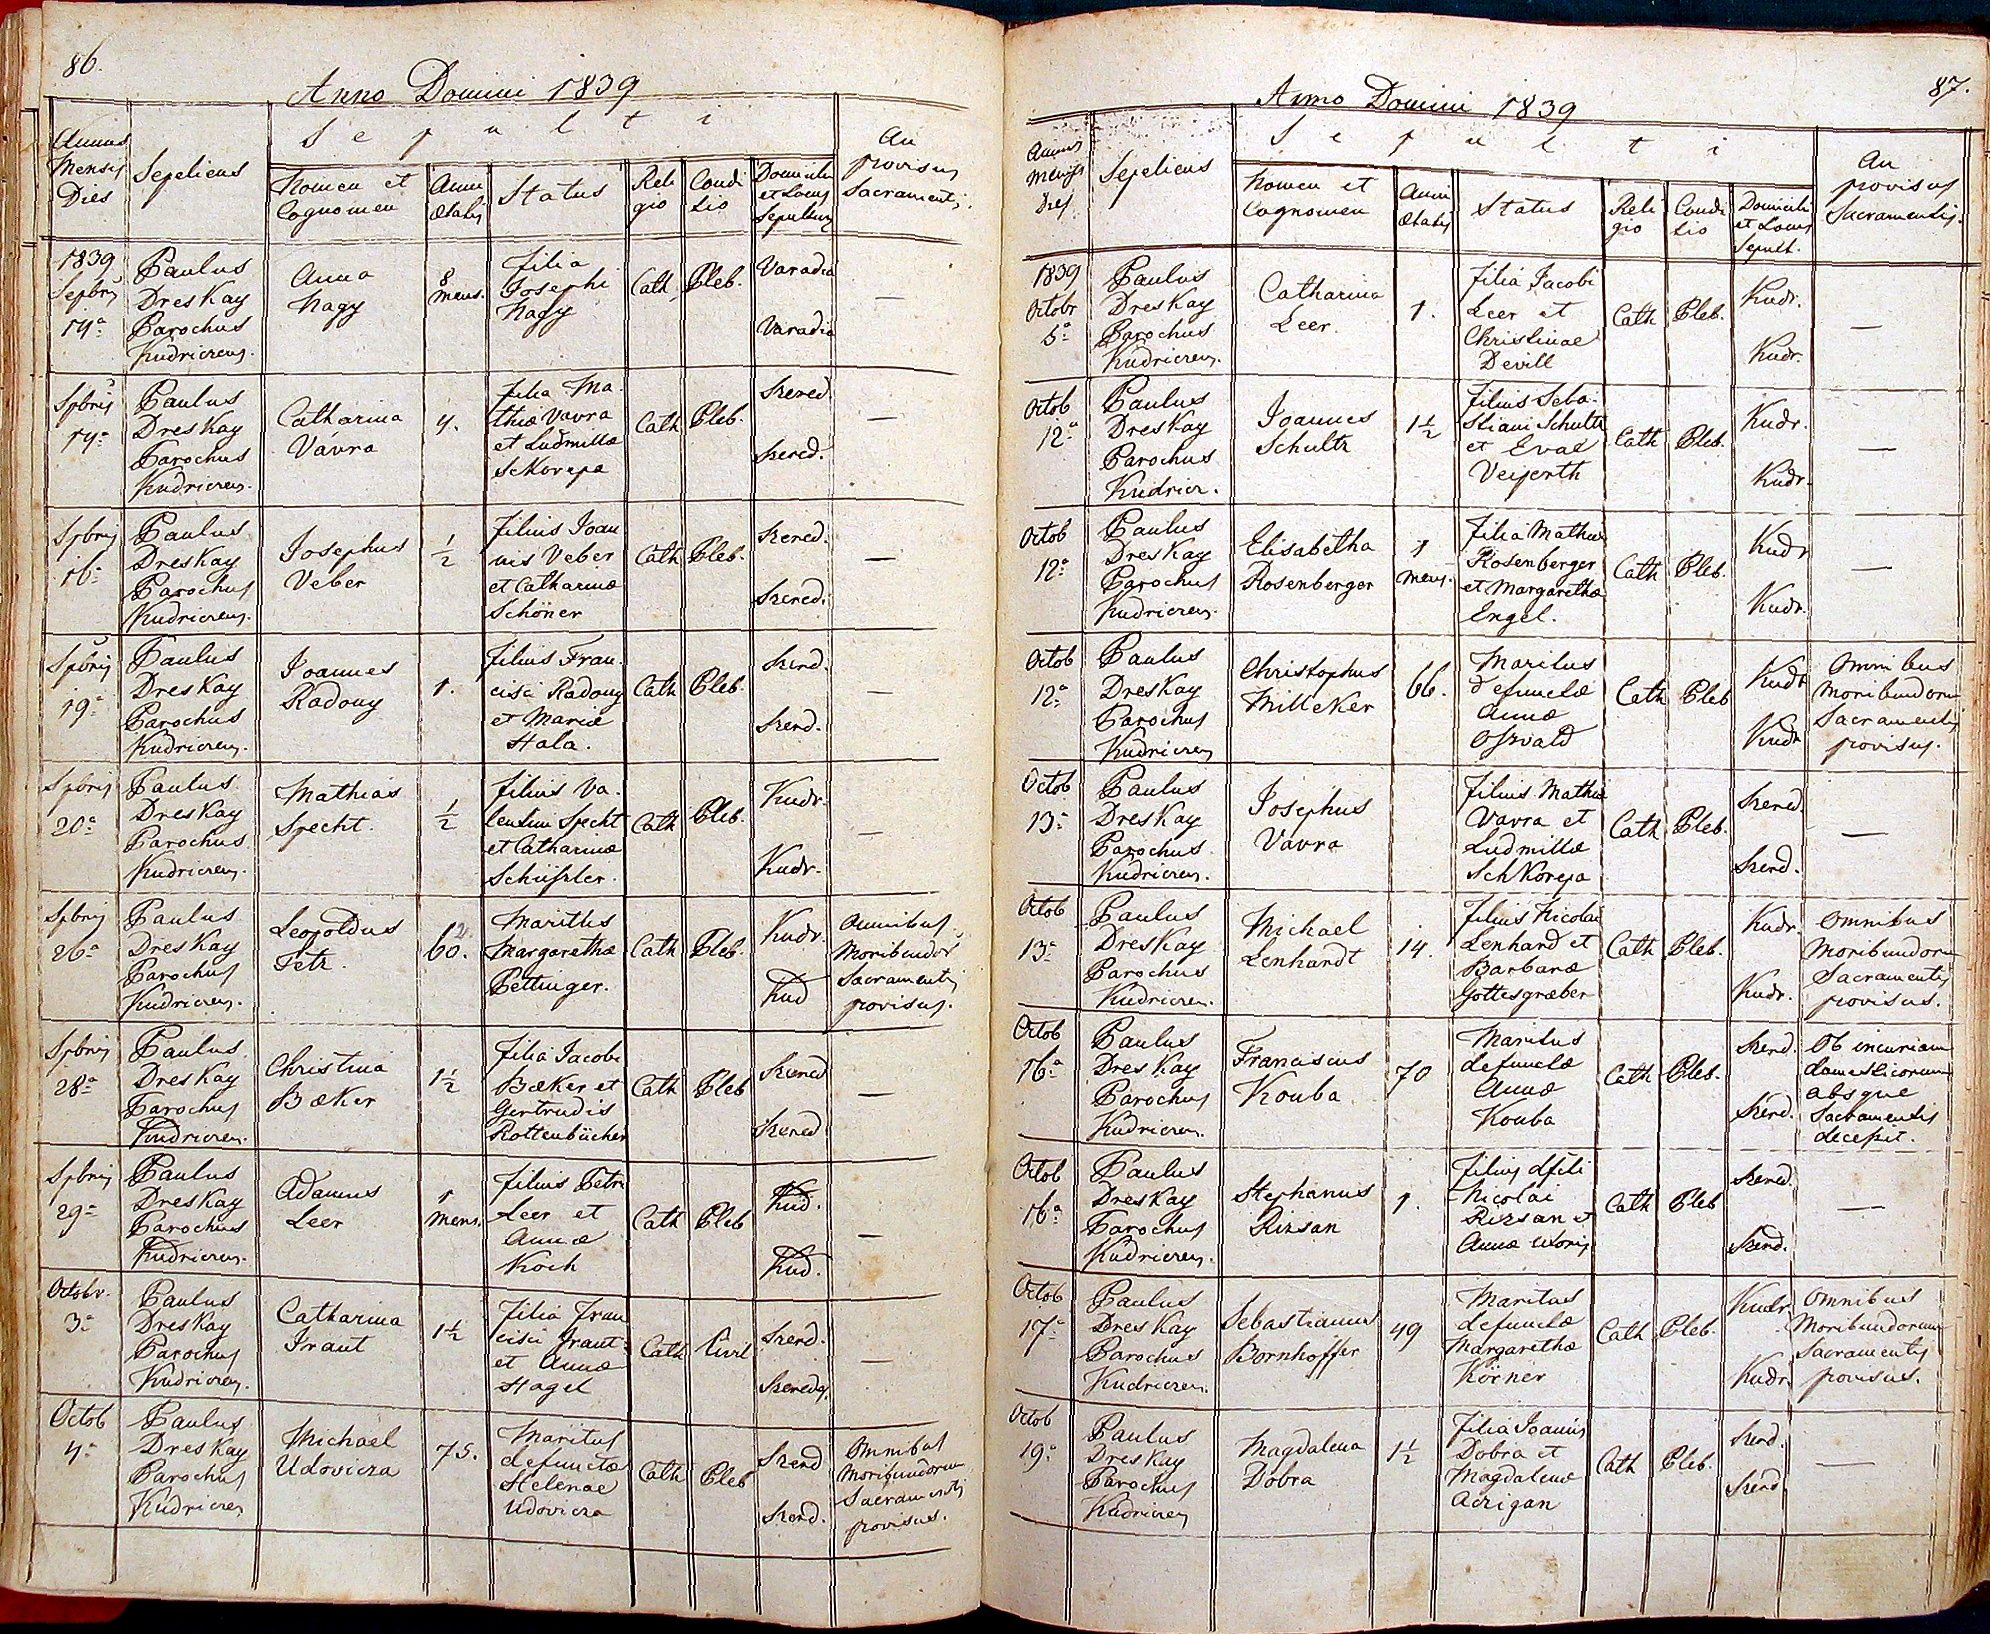 images/church_records/DEATHS/1775-1828D/086 i 087